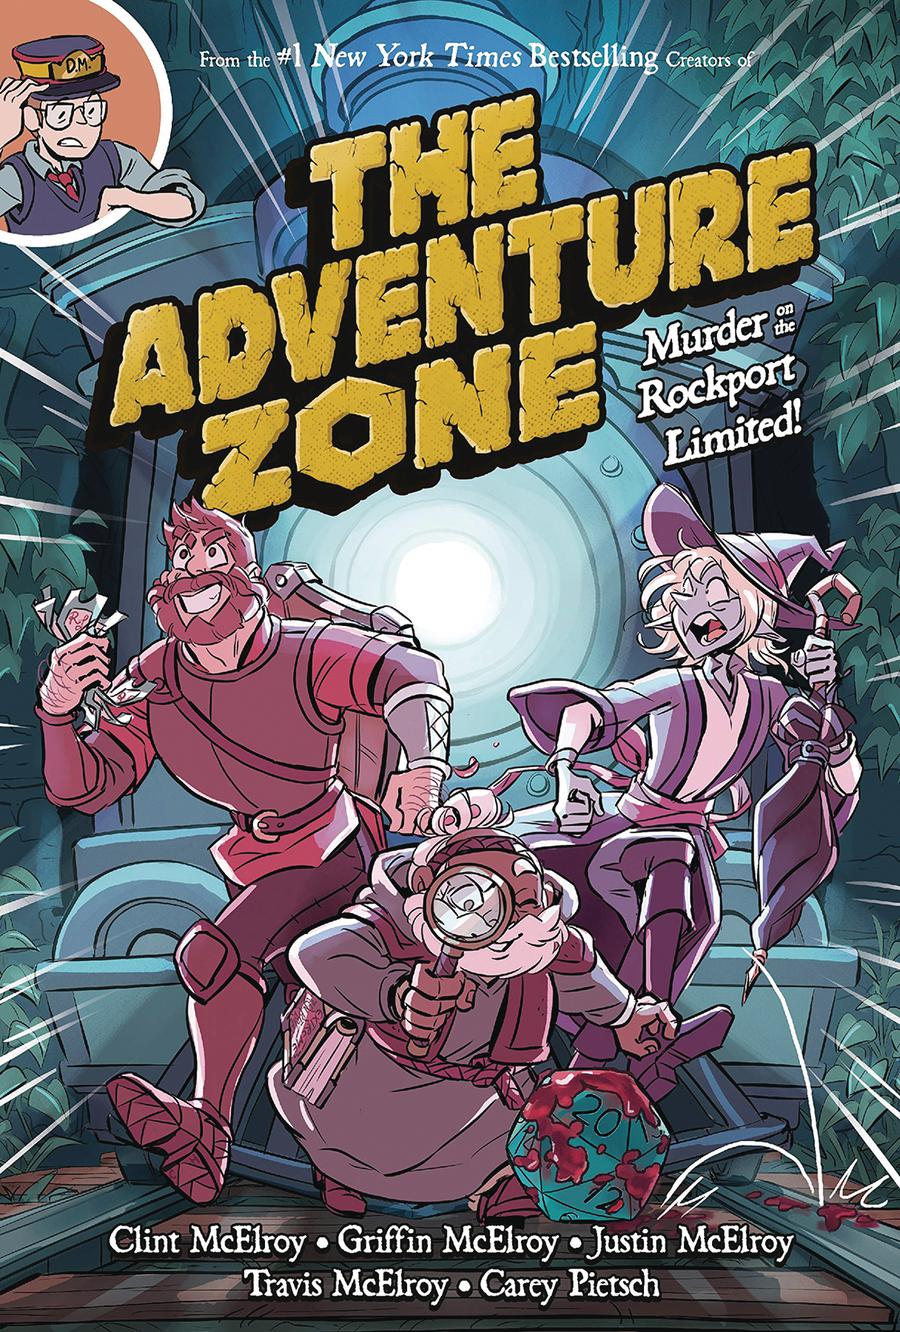 Adventure Zone Vol 2 Murder On The Rockport Limited TP